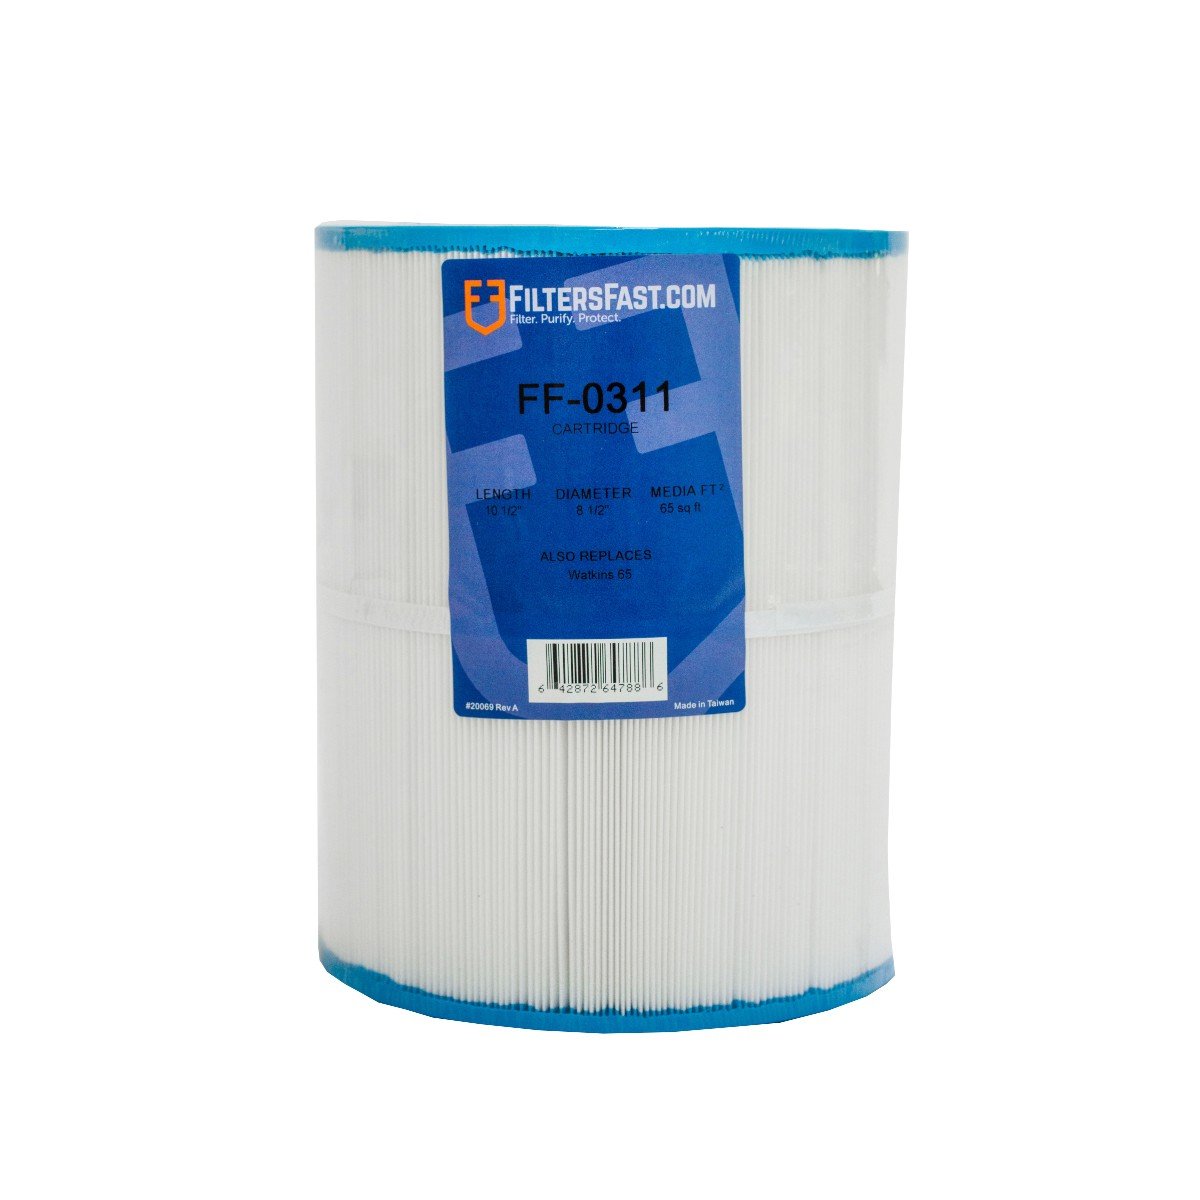 Filters Fast&reg; FF-0311 Replacement Pool & Spa Filter